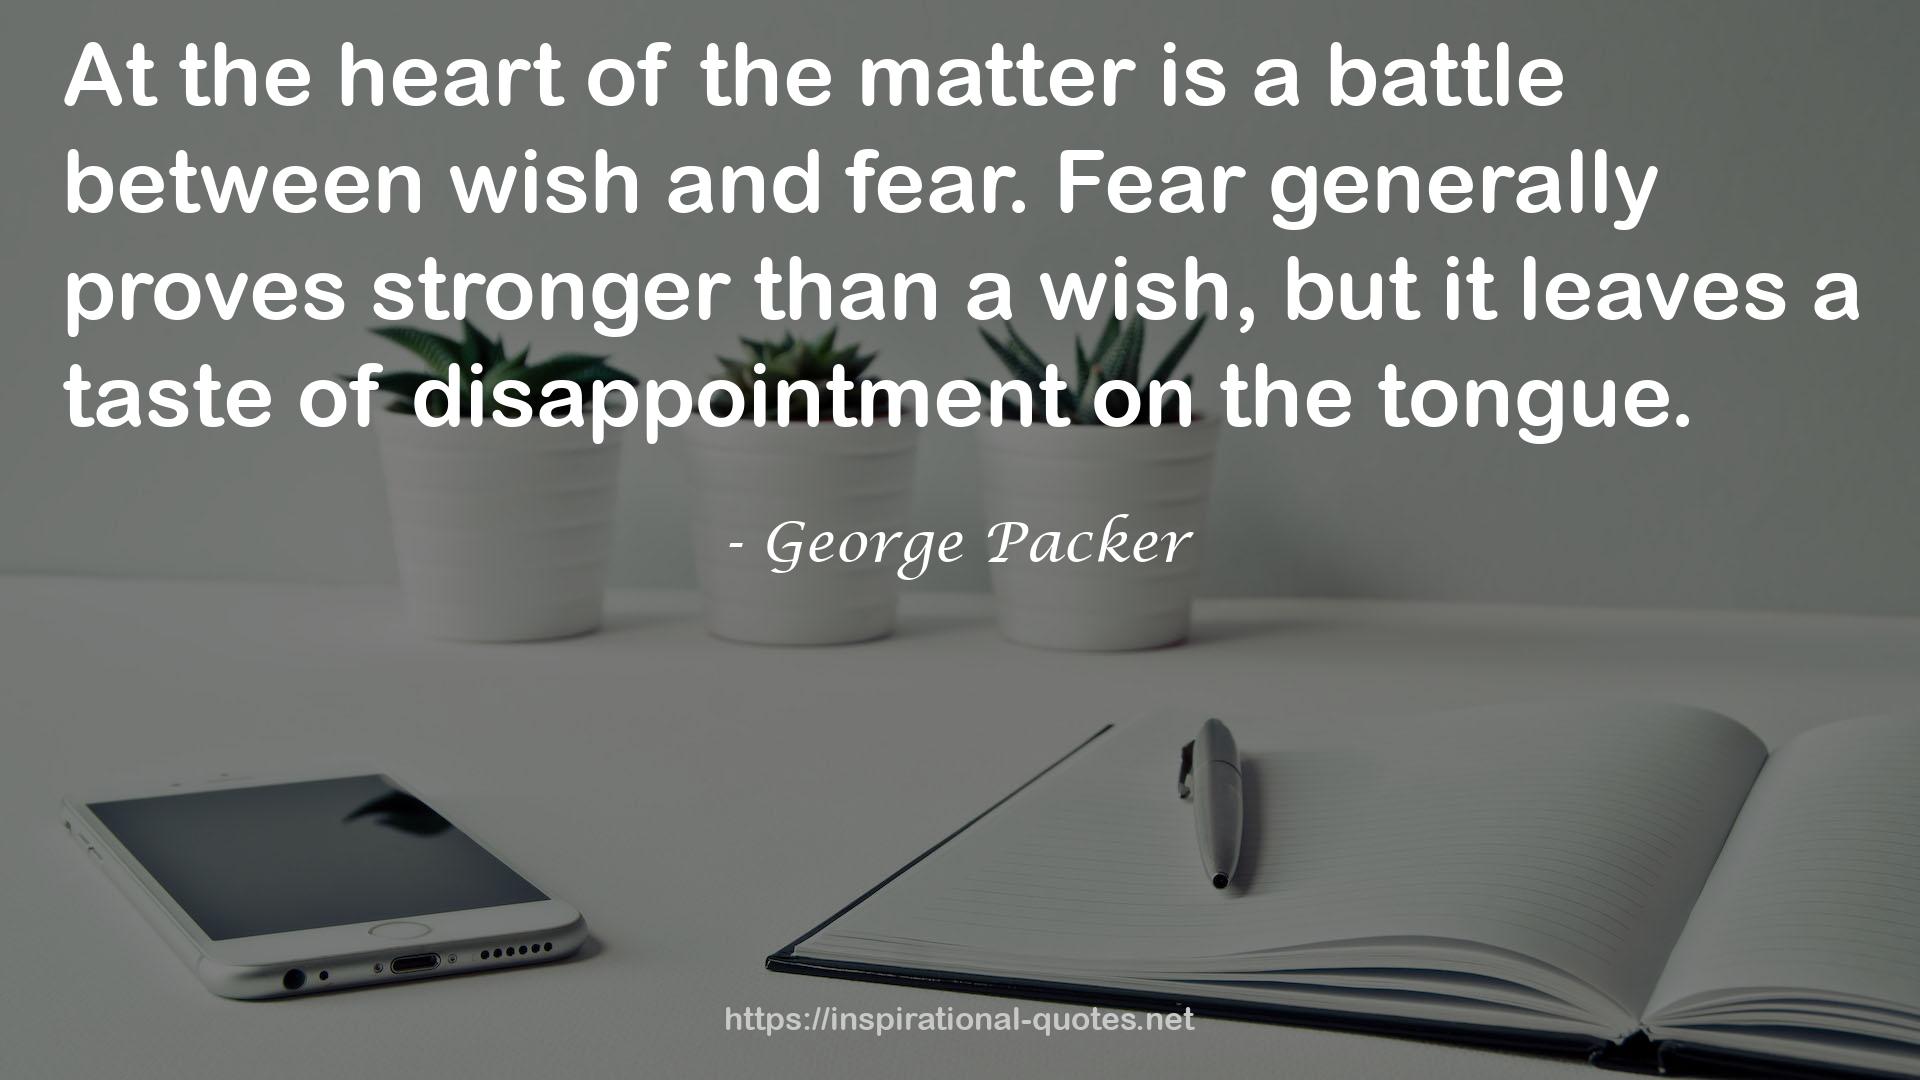 George Packer QUOTES